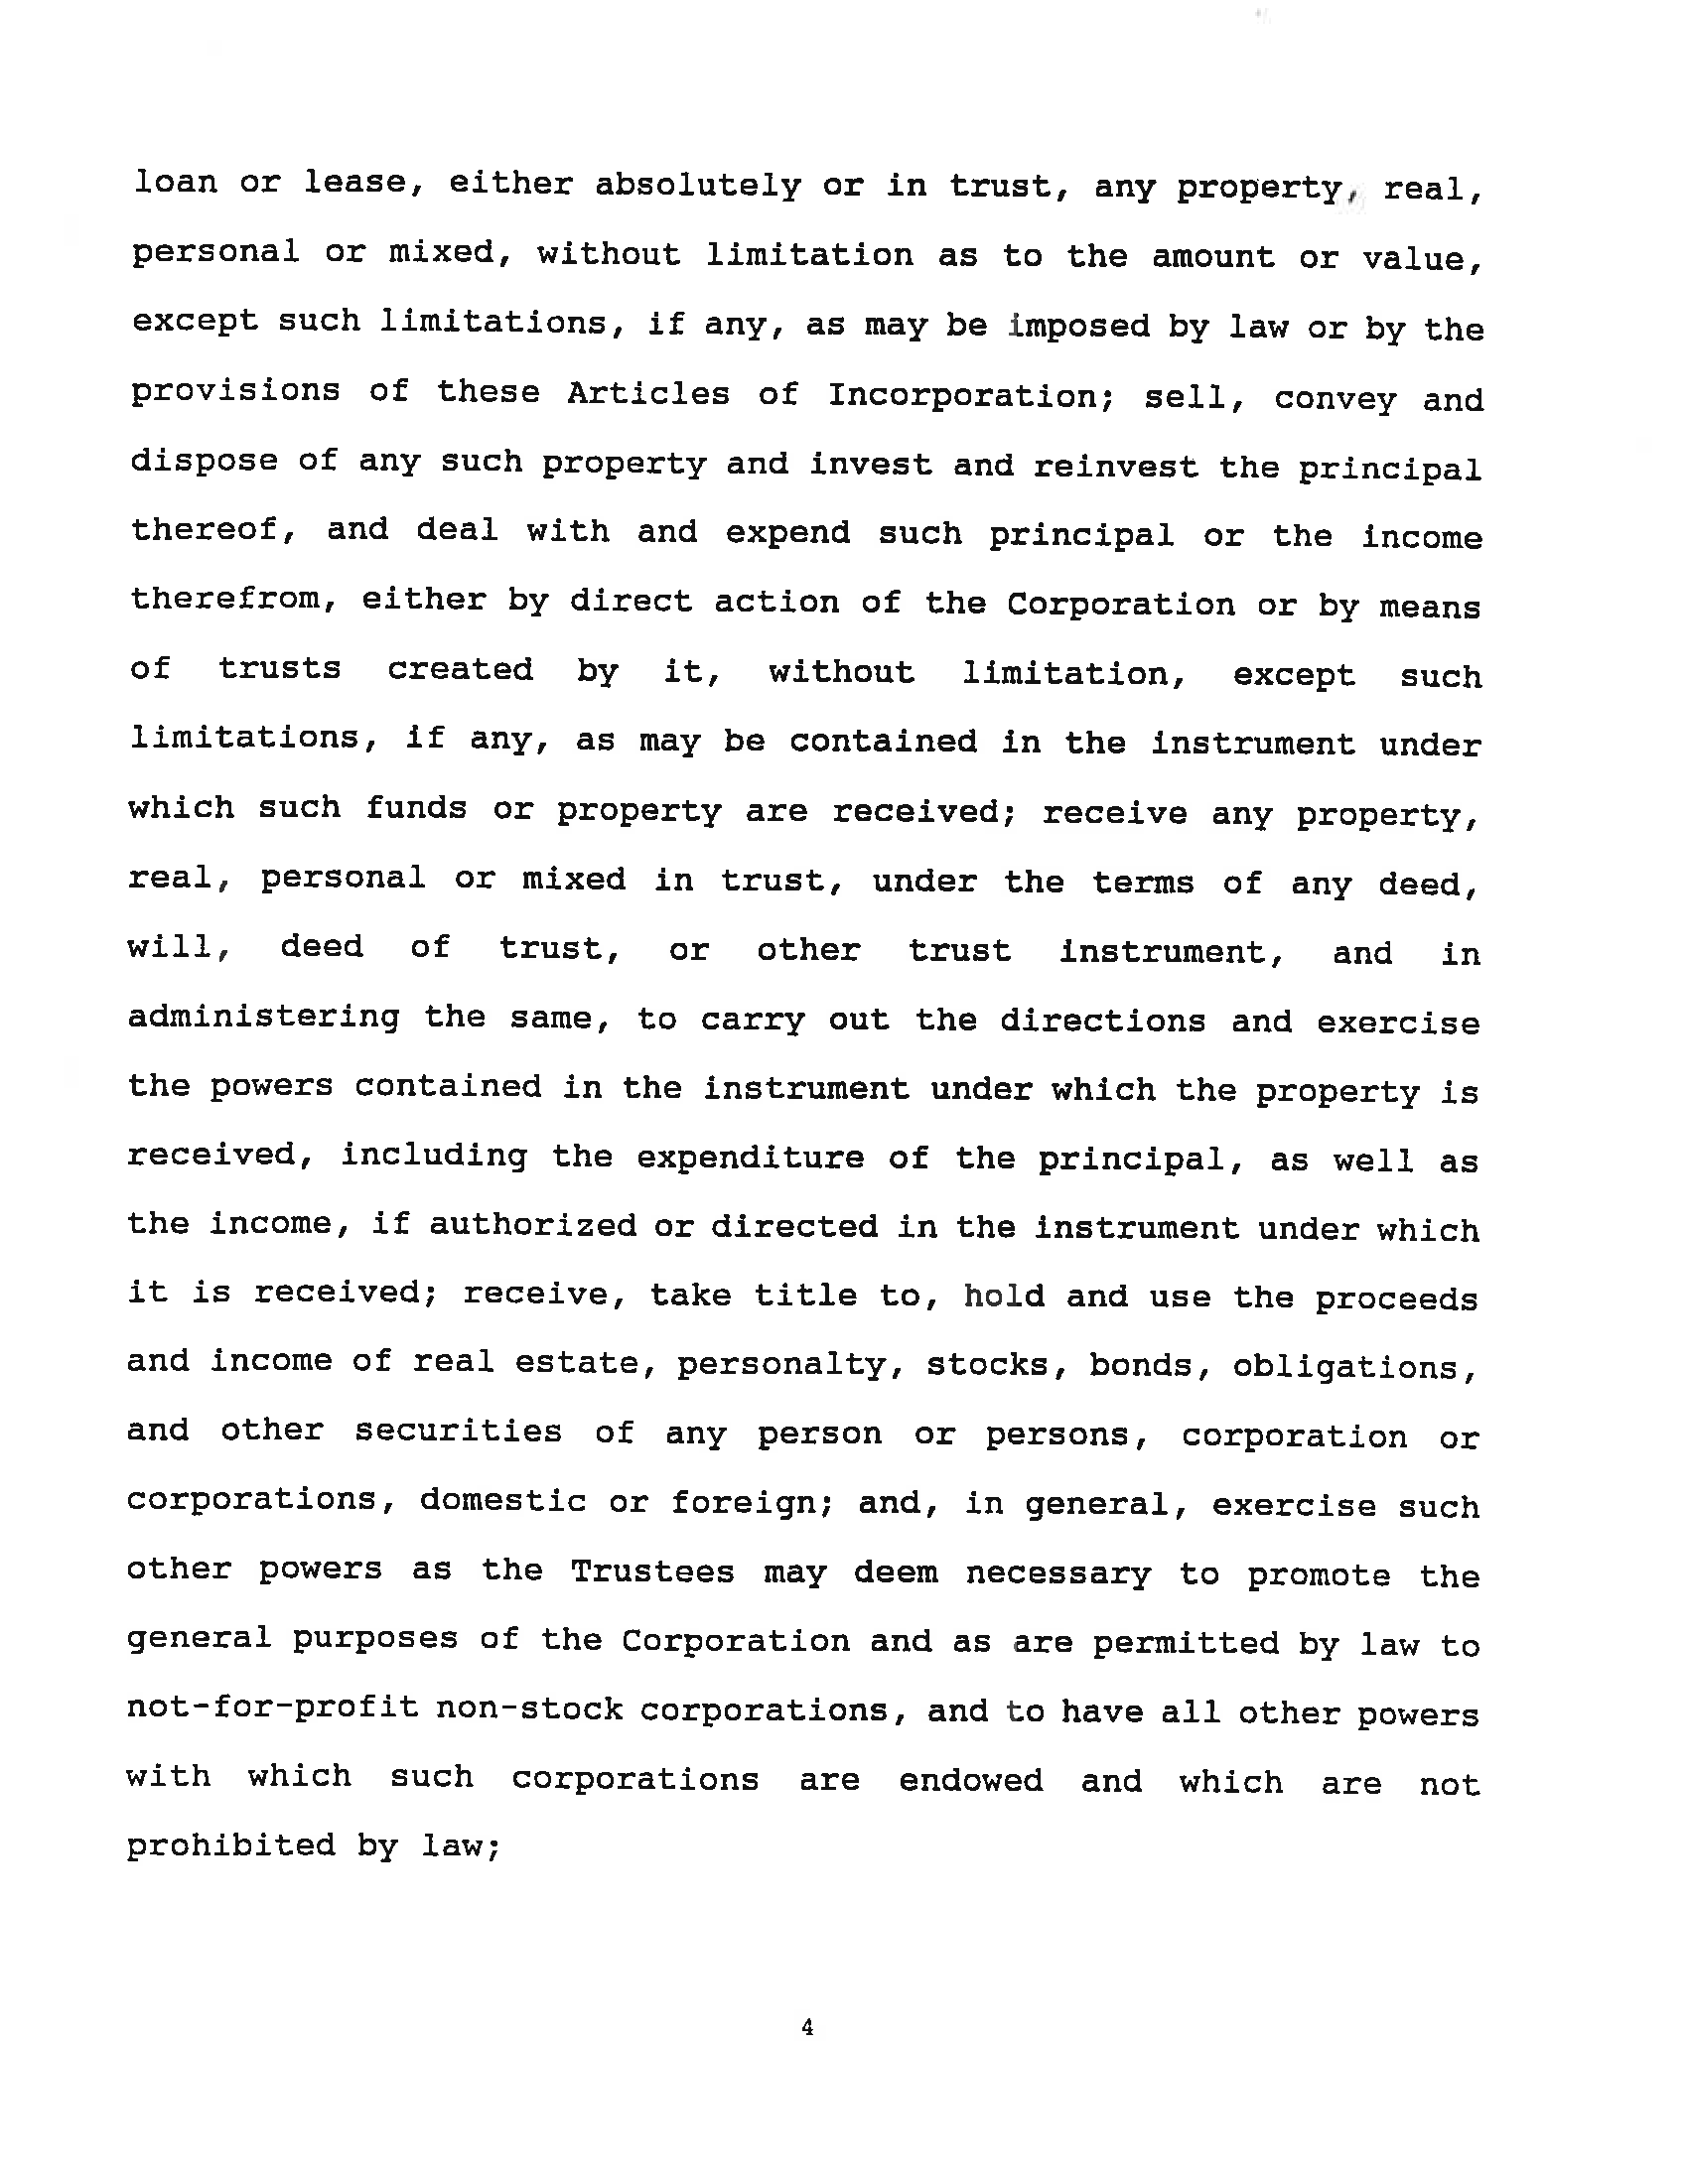 Menokin Foundation Articles of Incorporation_Page_06.png